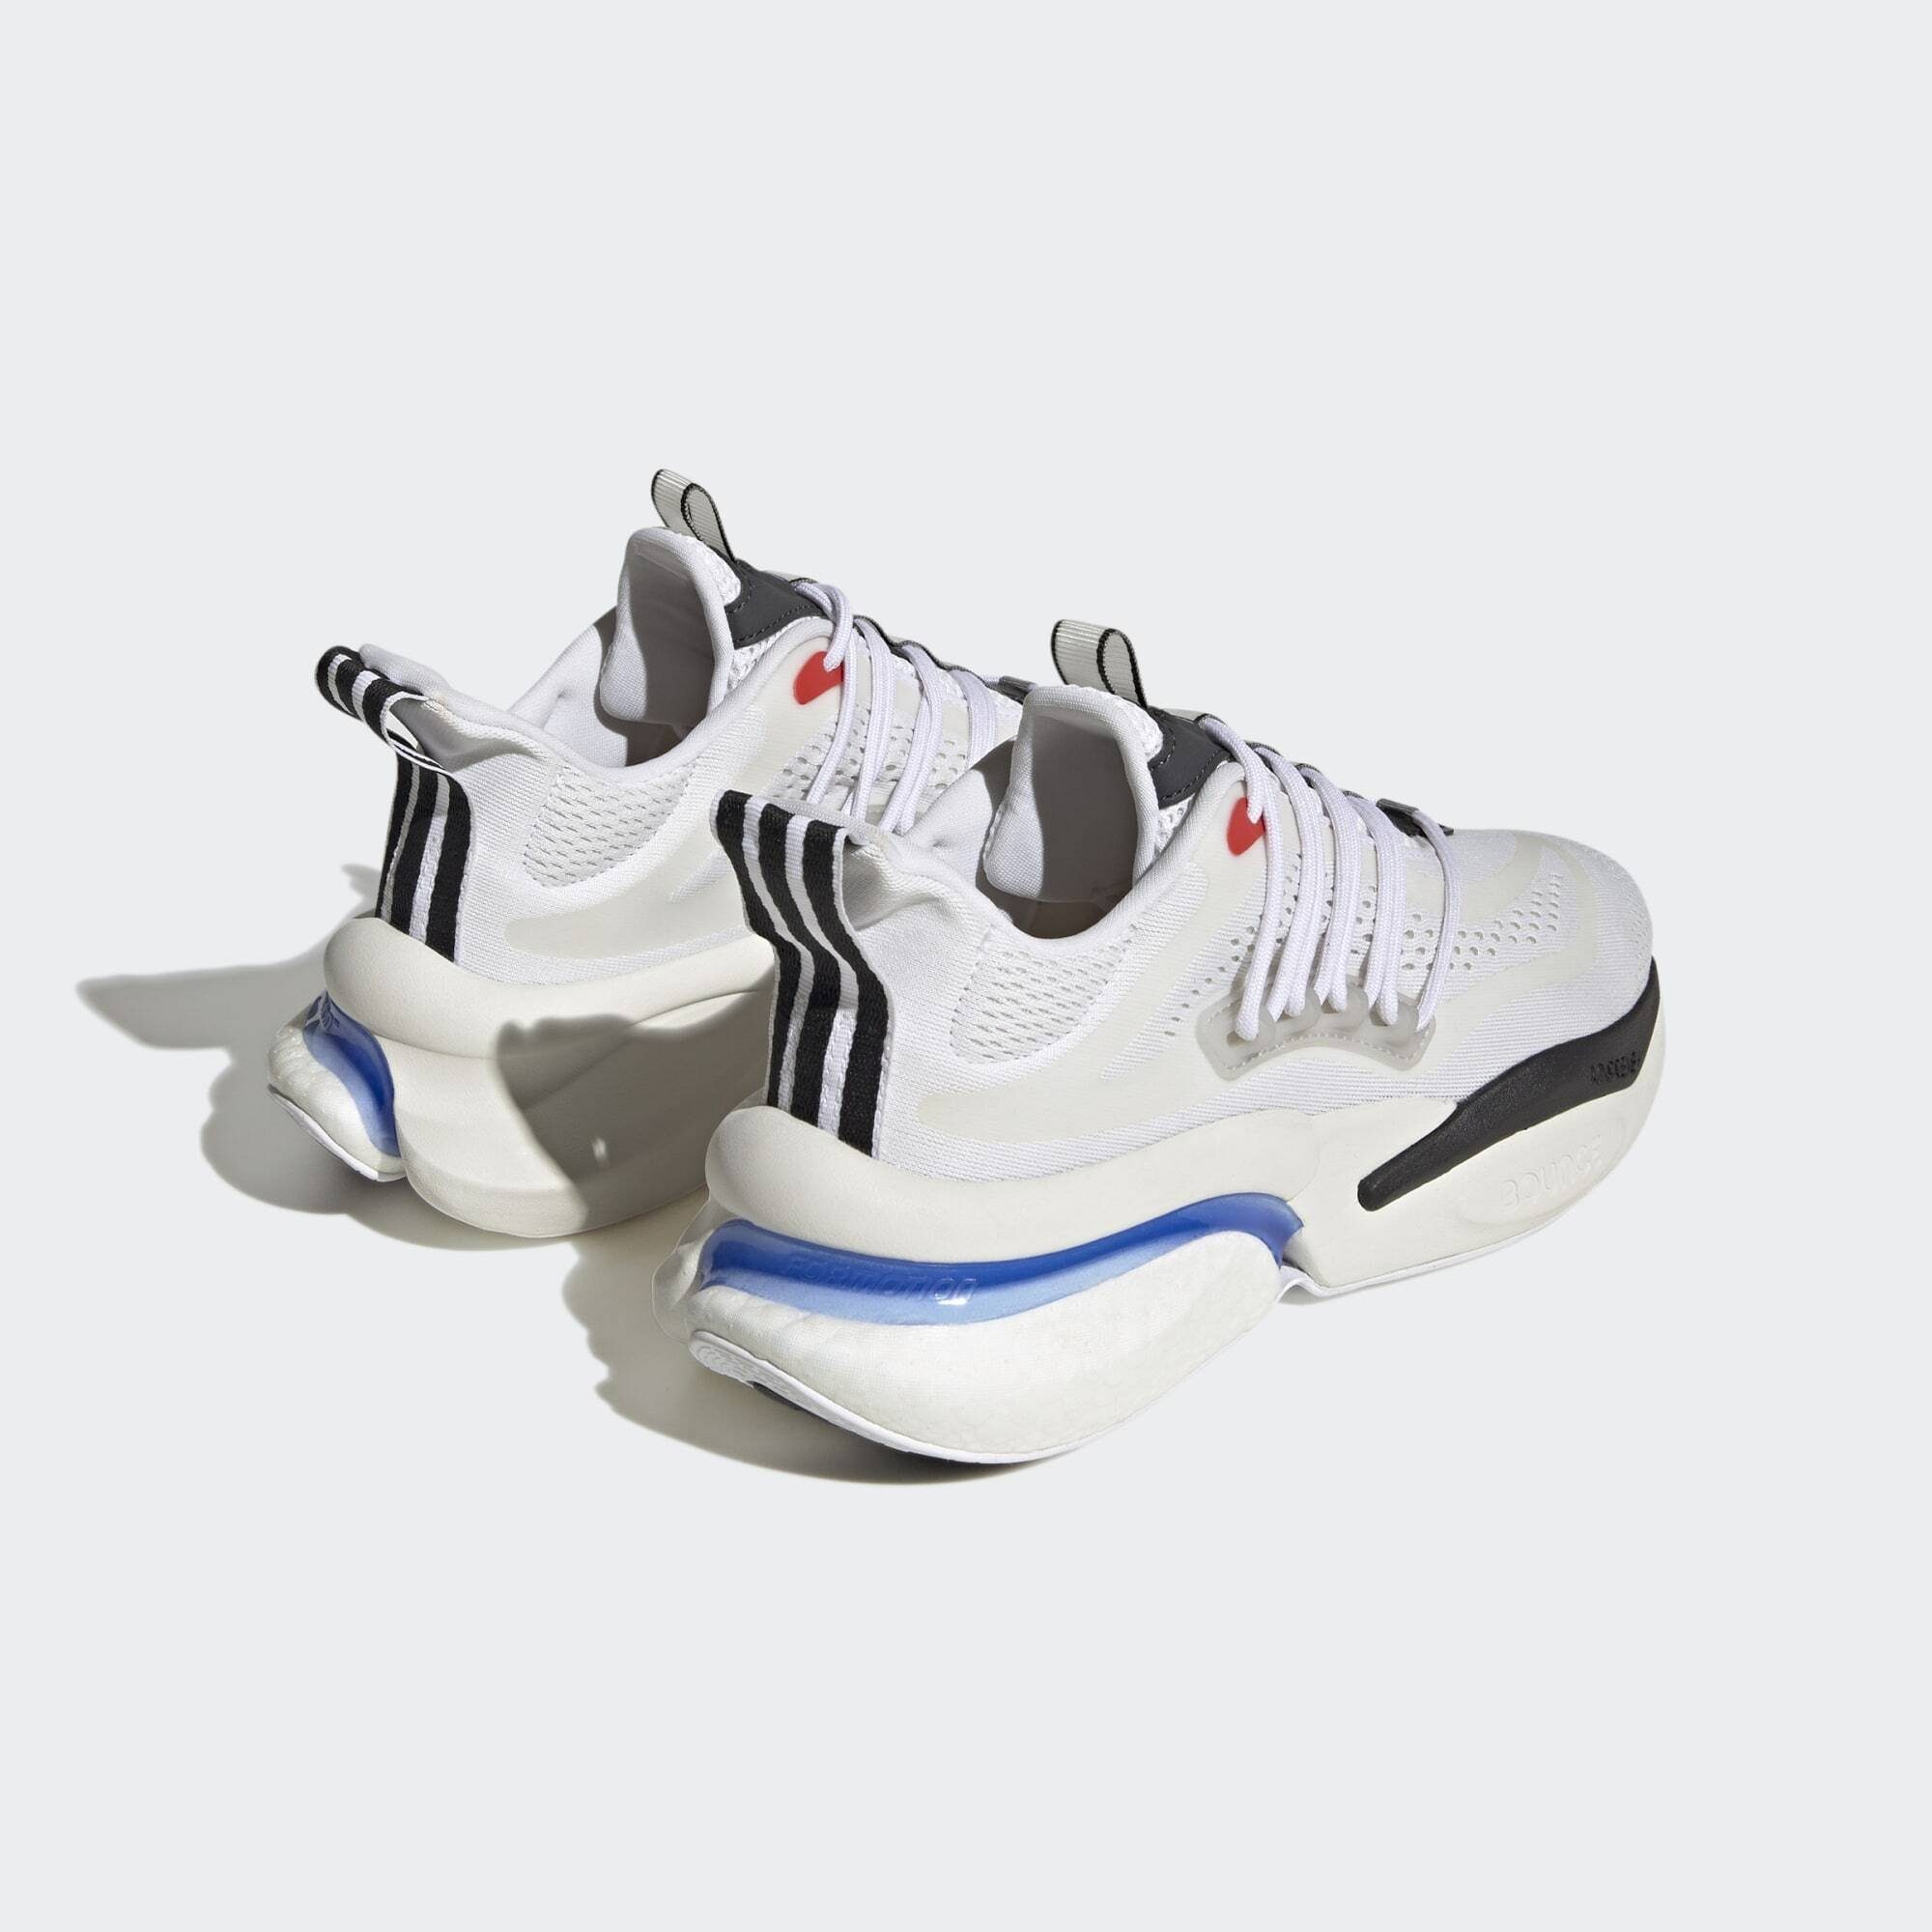 Blue / ALPHABOOST / Cloud adidas Sportswear Sneaker White SCHUH V1 Bright Red Fusion